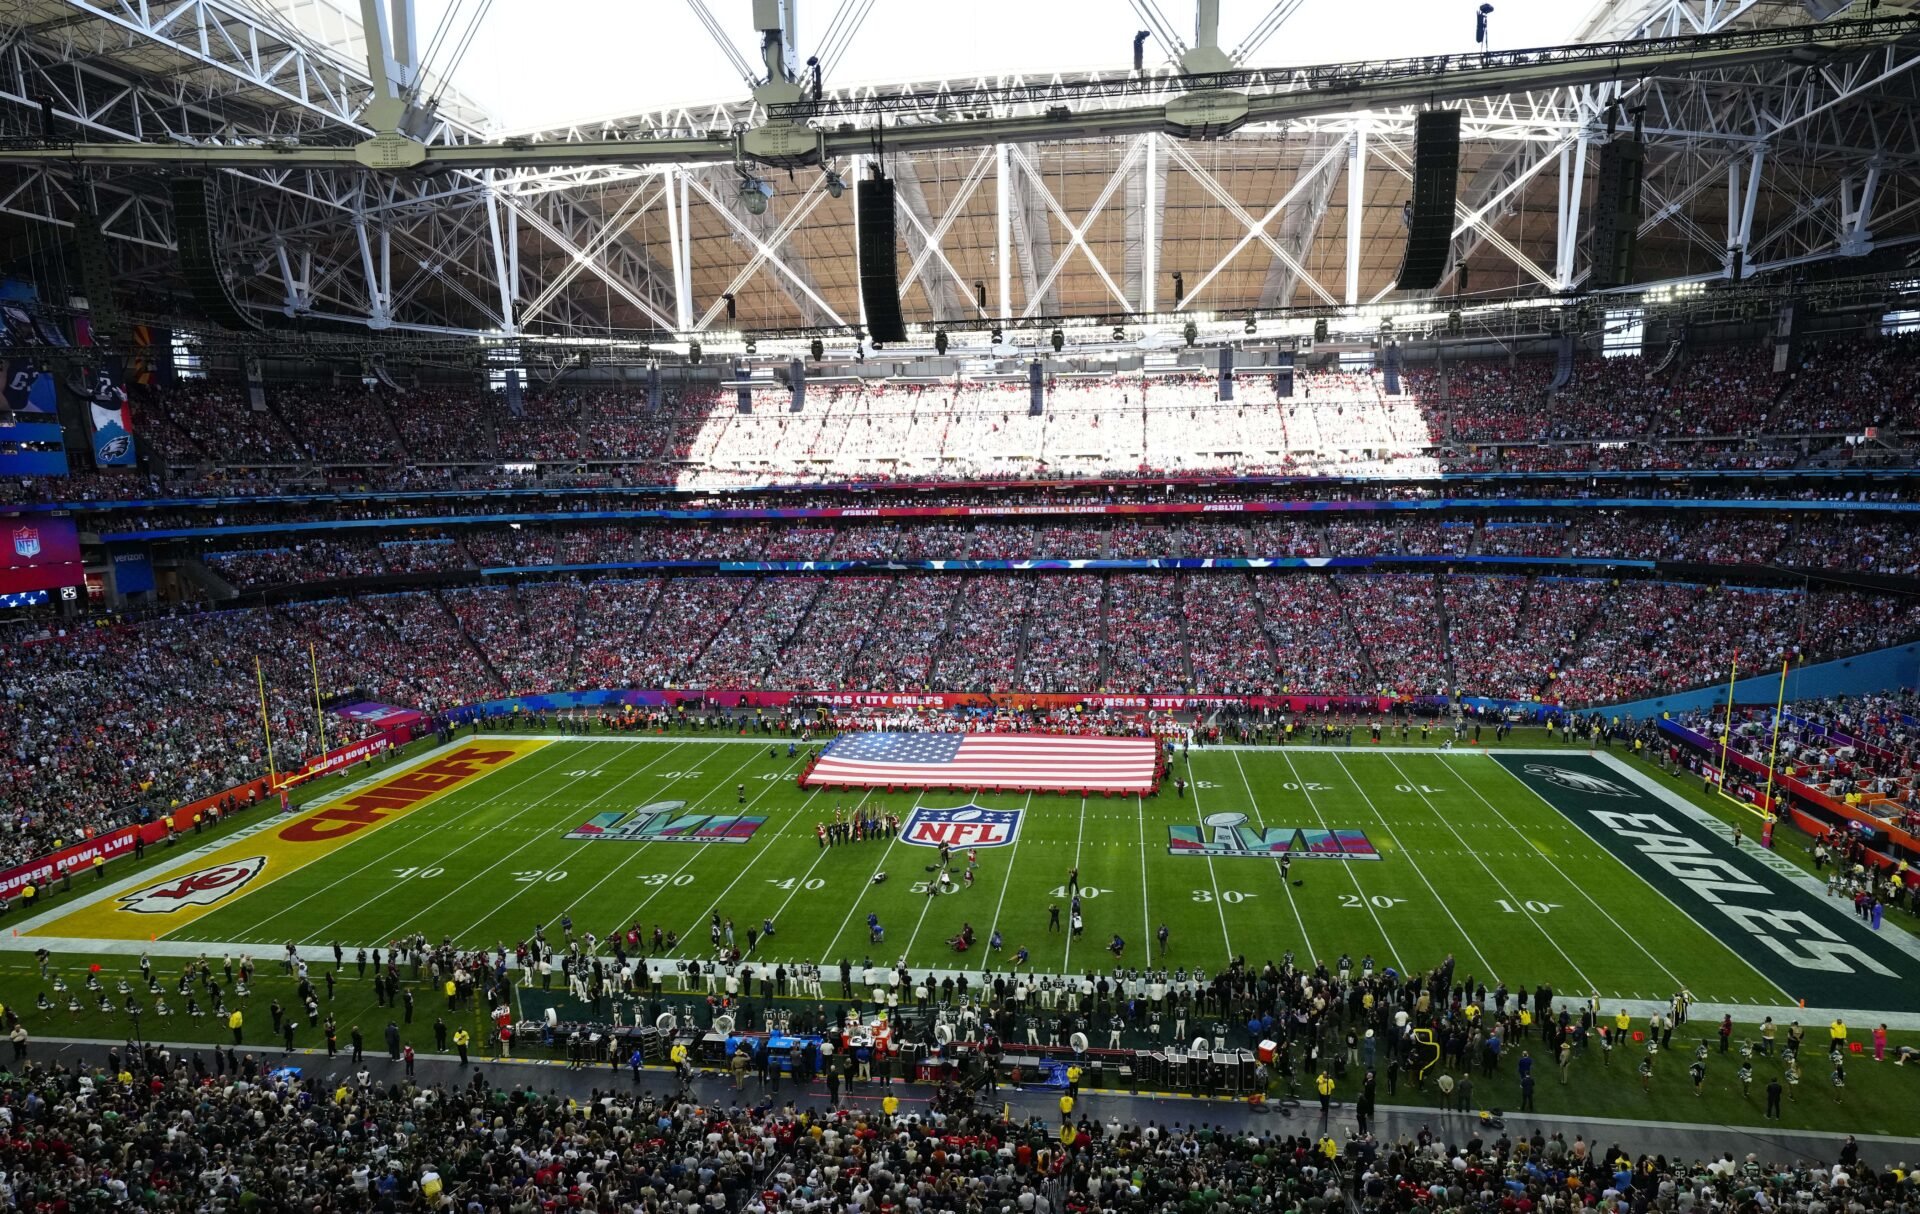 A general view during the playing of the national anthem before Super Bowl LVII between the Kansas City Chiefs and Philadelphia Eagles.